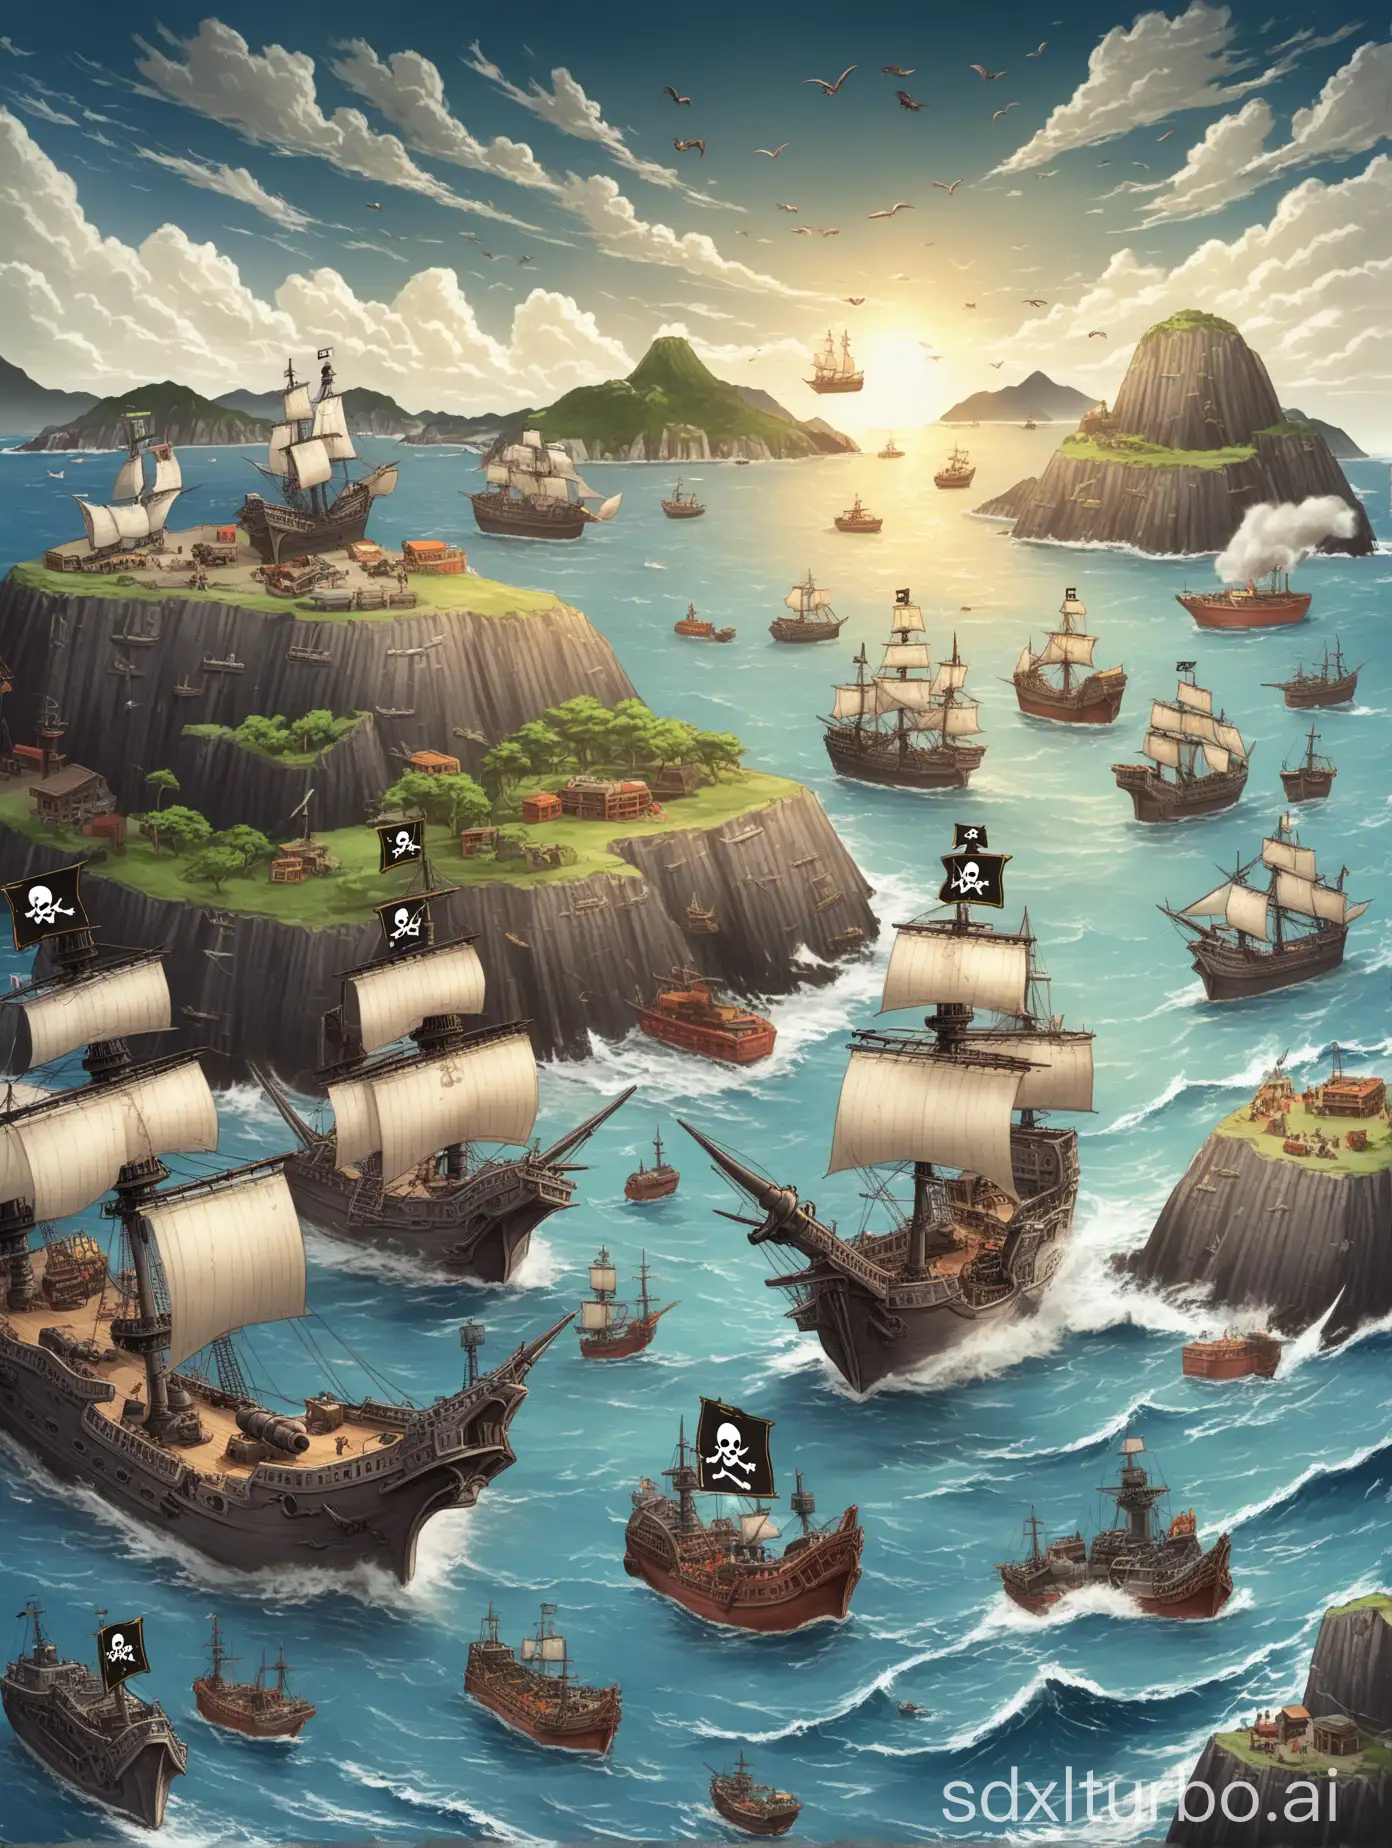 On the sea, there is an island, Keelung Island, with pirate ships and squid,Warship fires cannon at squid